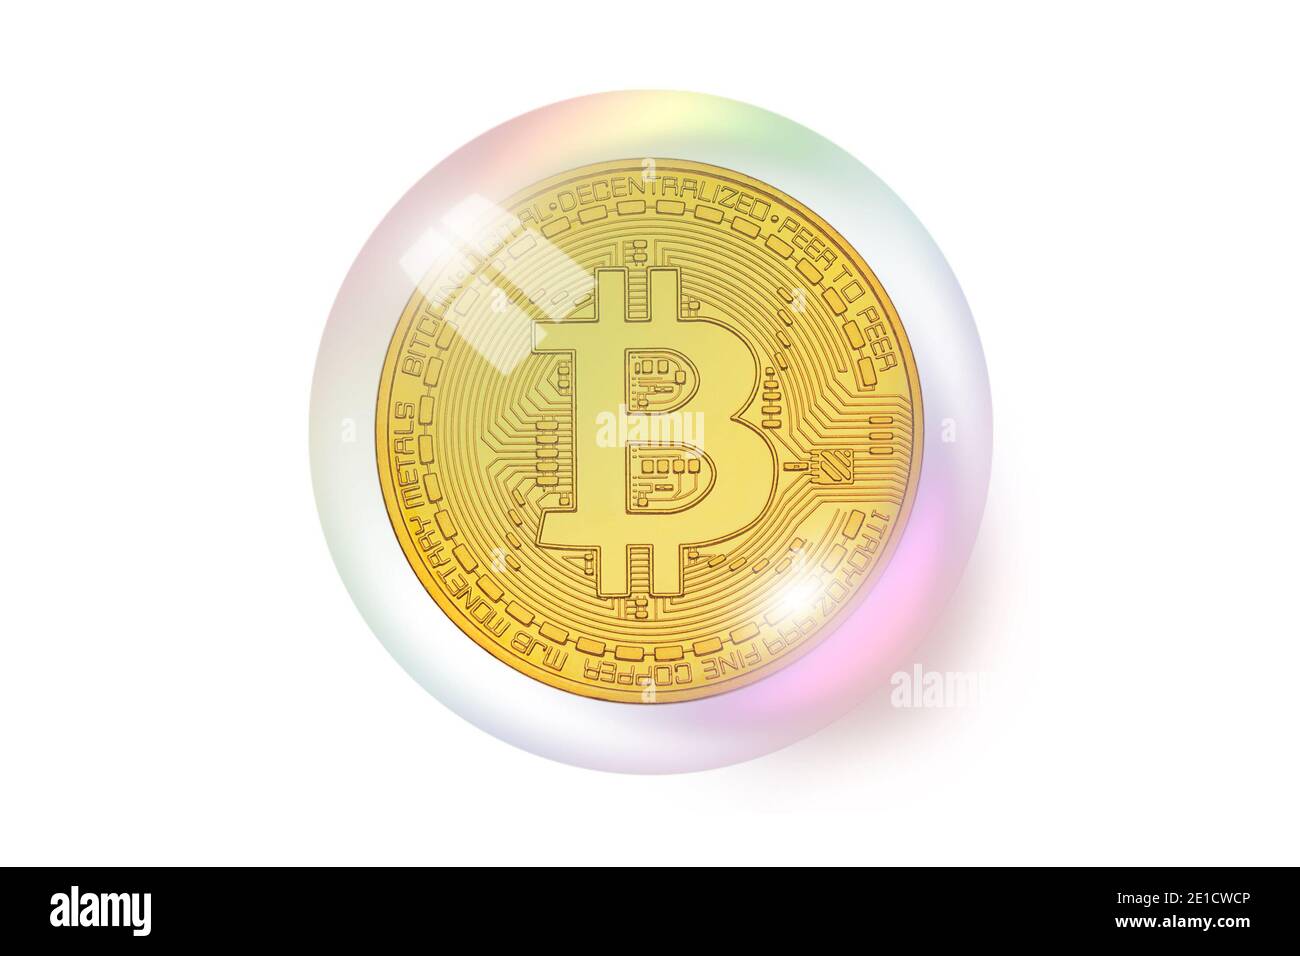 Concept of Bitcoin bubble and speculation. Isolated on white background. Crypto asset for the futuristic virtual gold. Bearish Bitcoin currency value Stock Photo